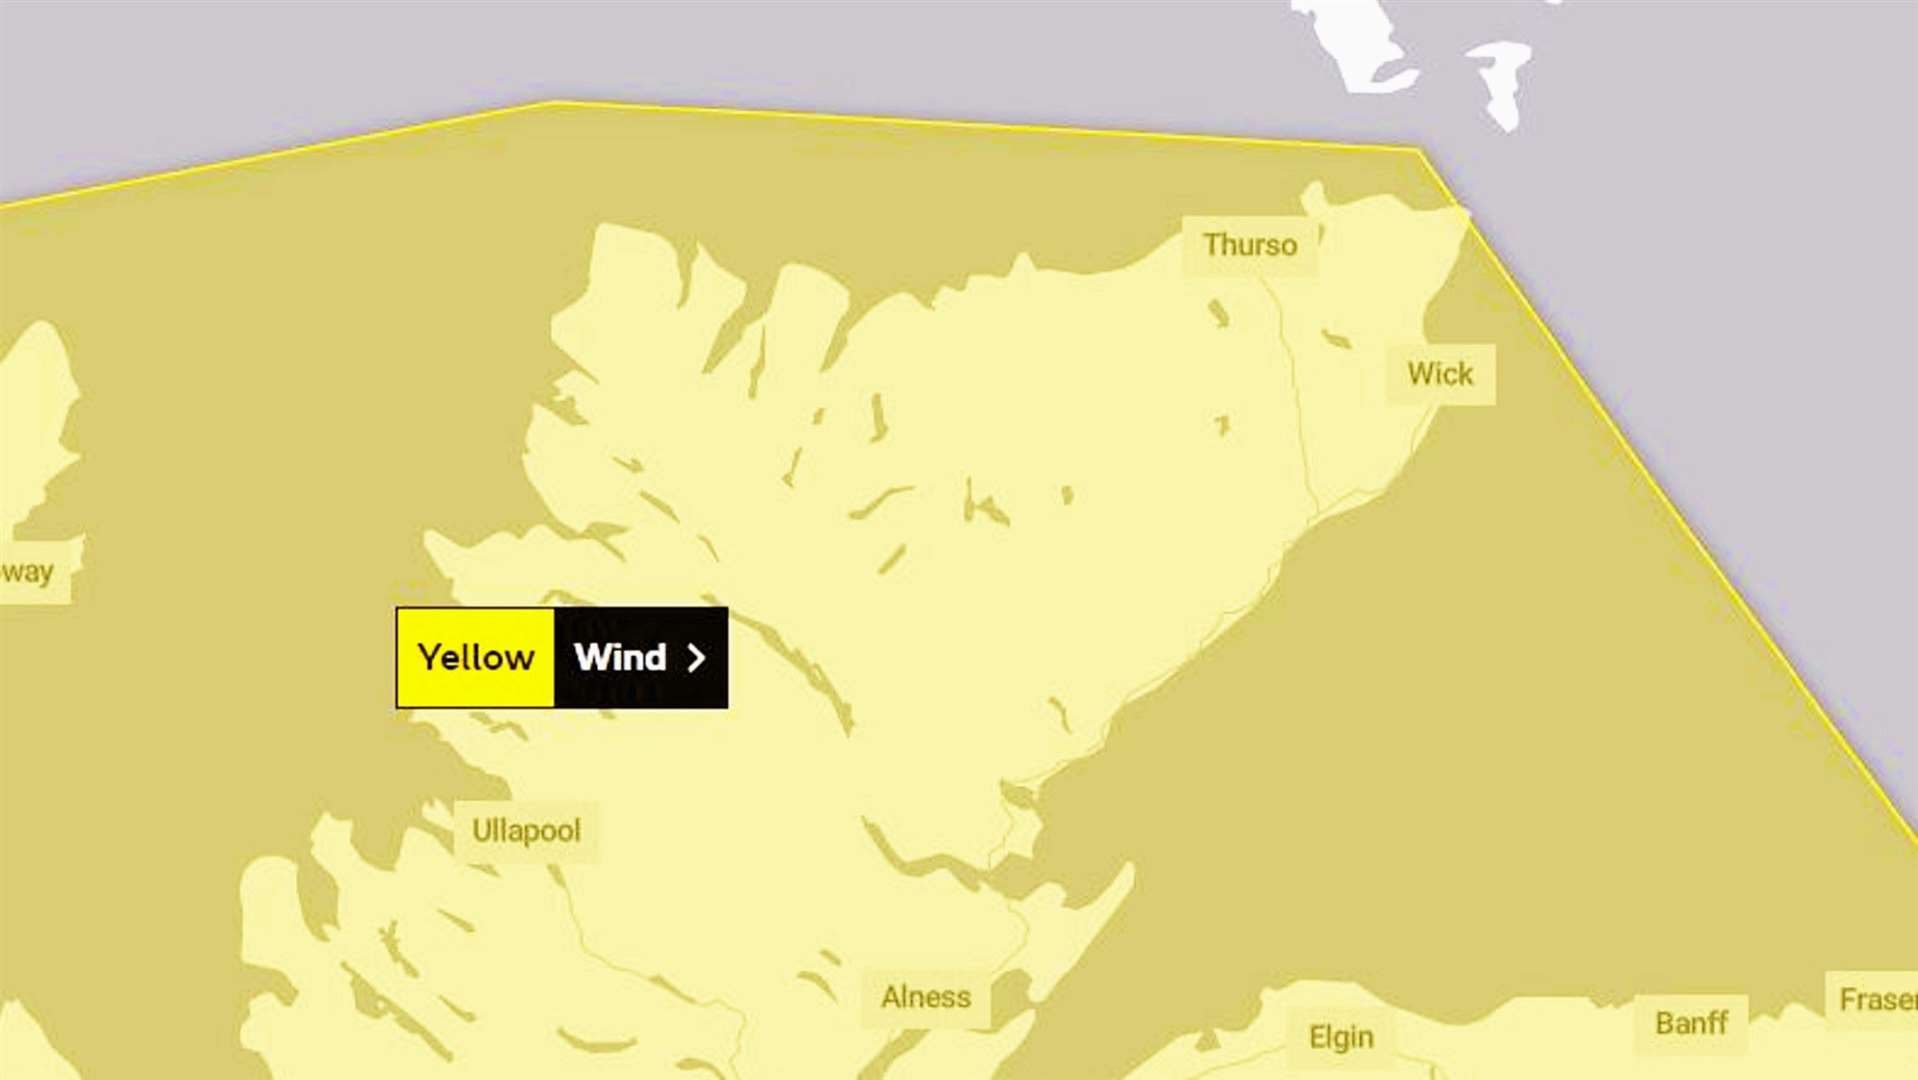 Met Office map showing high winds forecast for Caithness over Wednesday and Thursday this week.